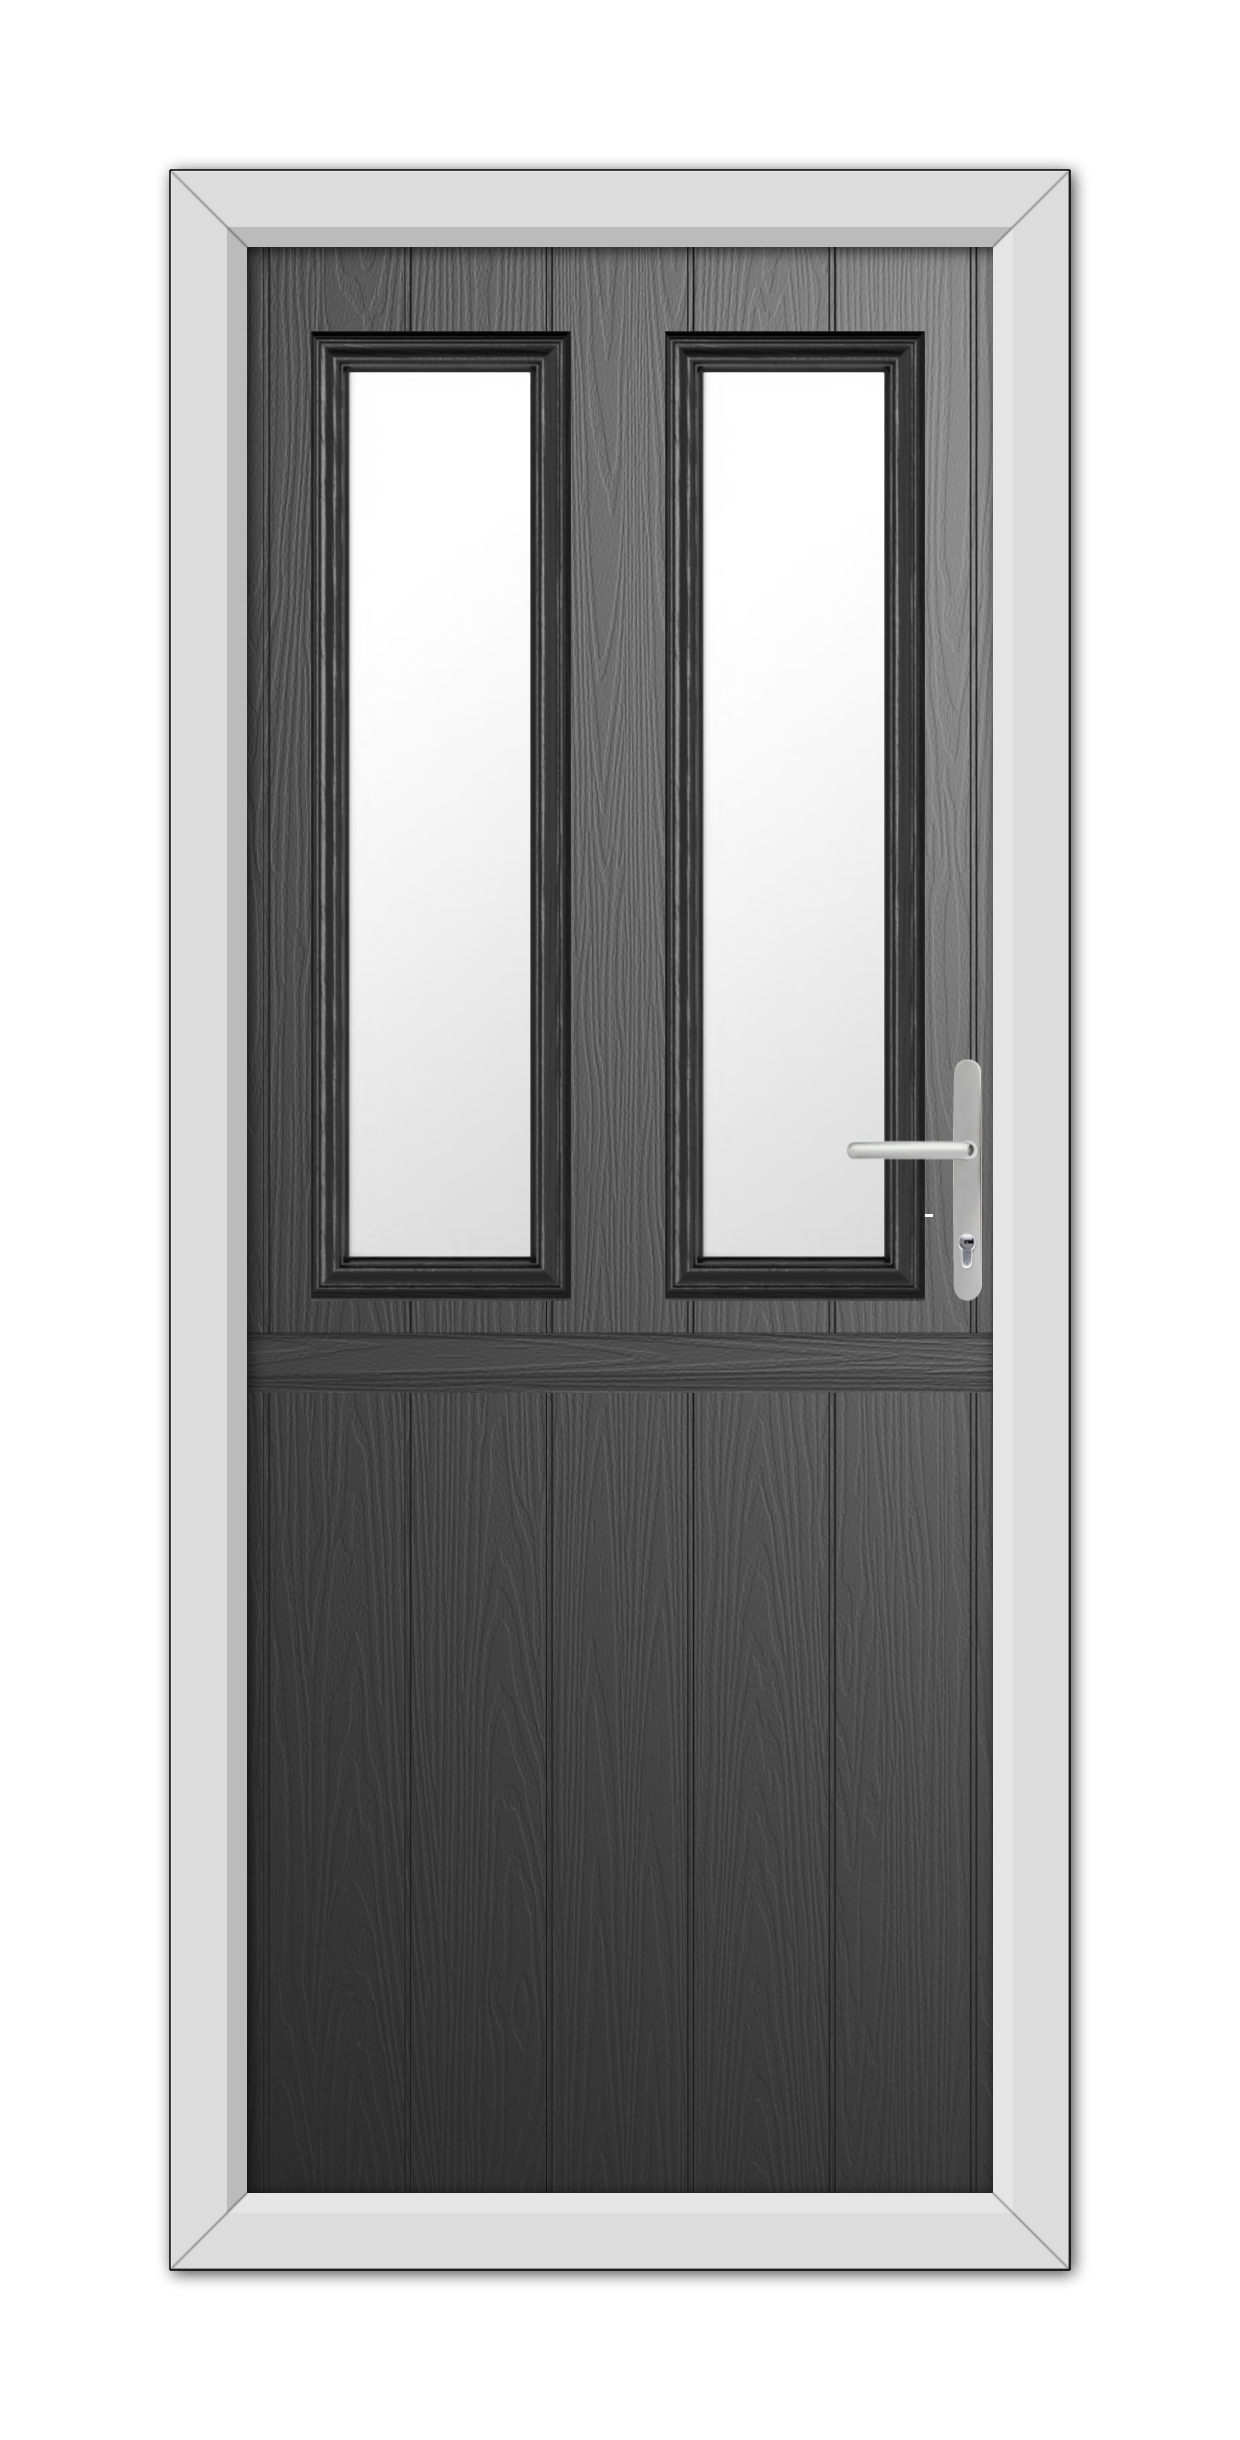 A modern Black Wellington Stable Composite Door 48mm Timber Core with a dark wood finish featuring two vertical windows and a metallic handle, set in a white frame.